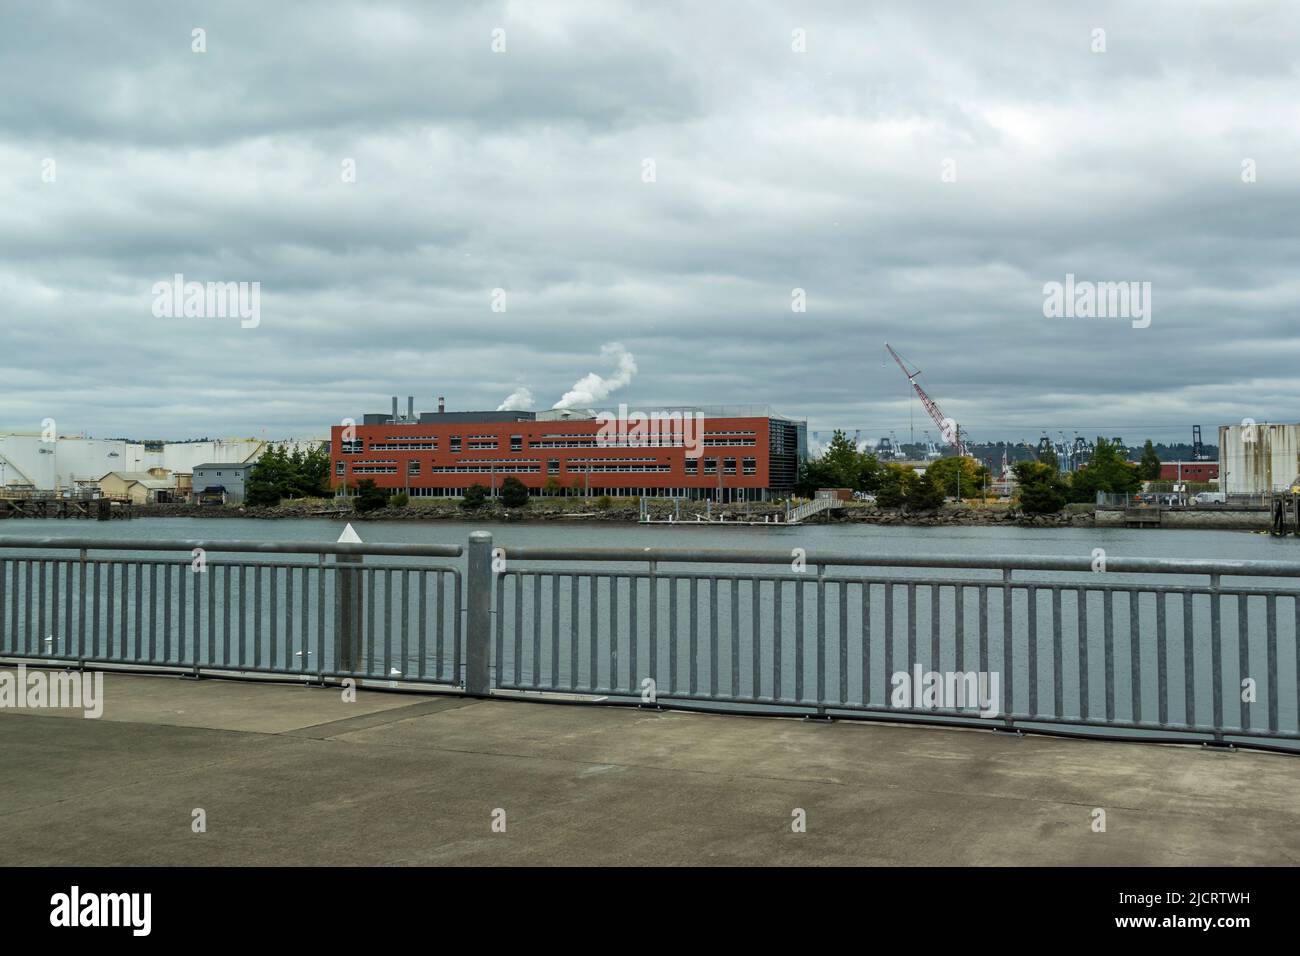 Tacoma, WA USA - circa August 2021: Wide view of the University of Washington Center for Urban Waters across the Thea Foss Waterway. Stock Photo